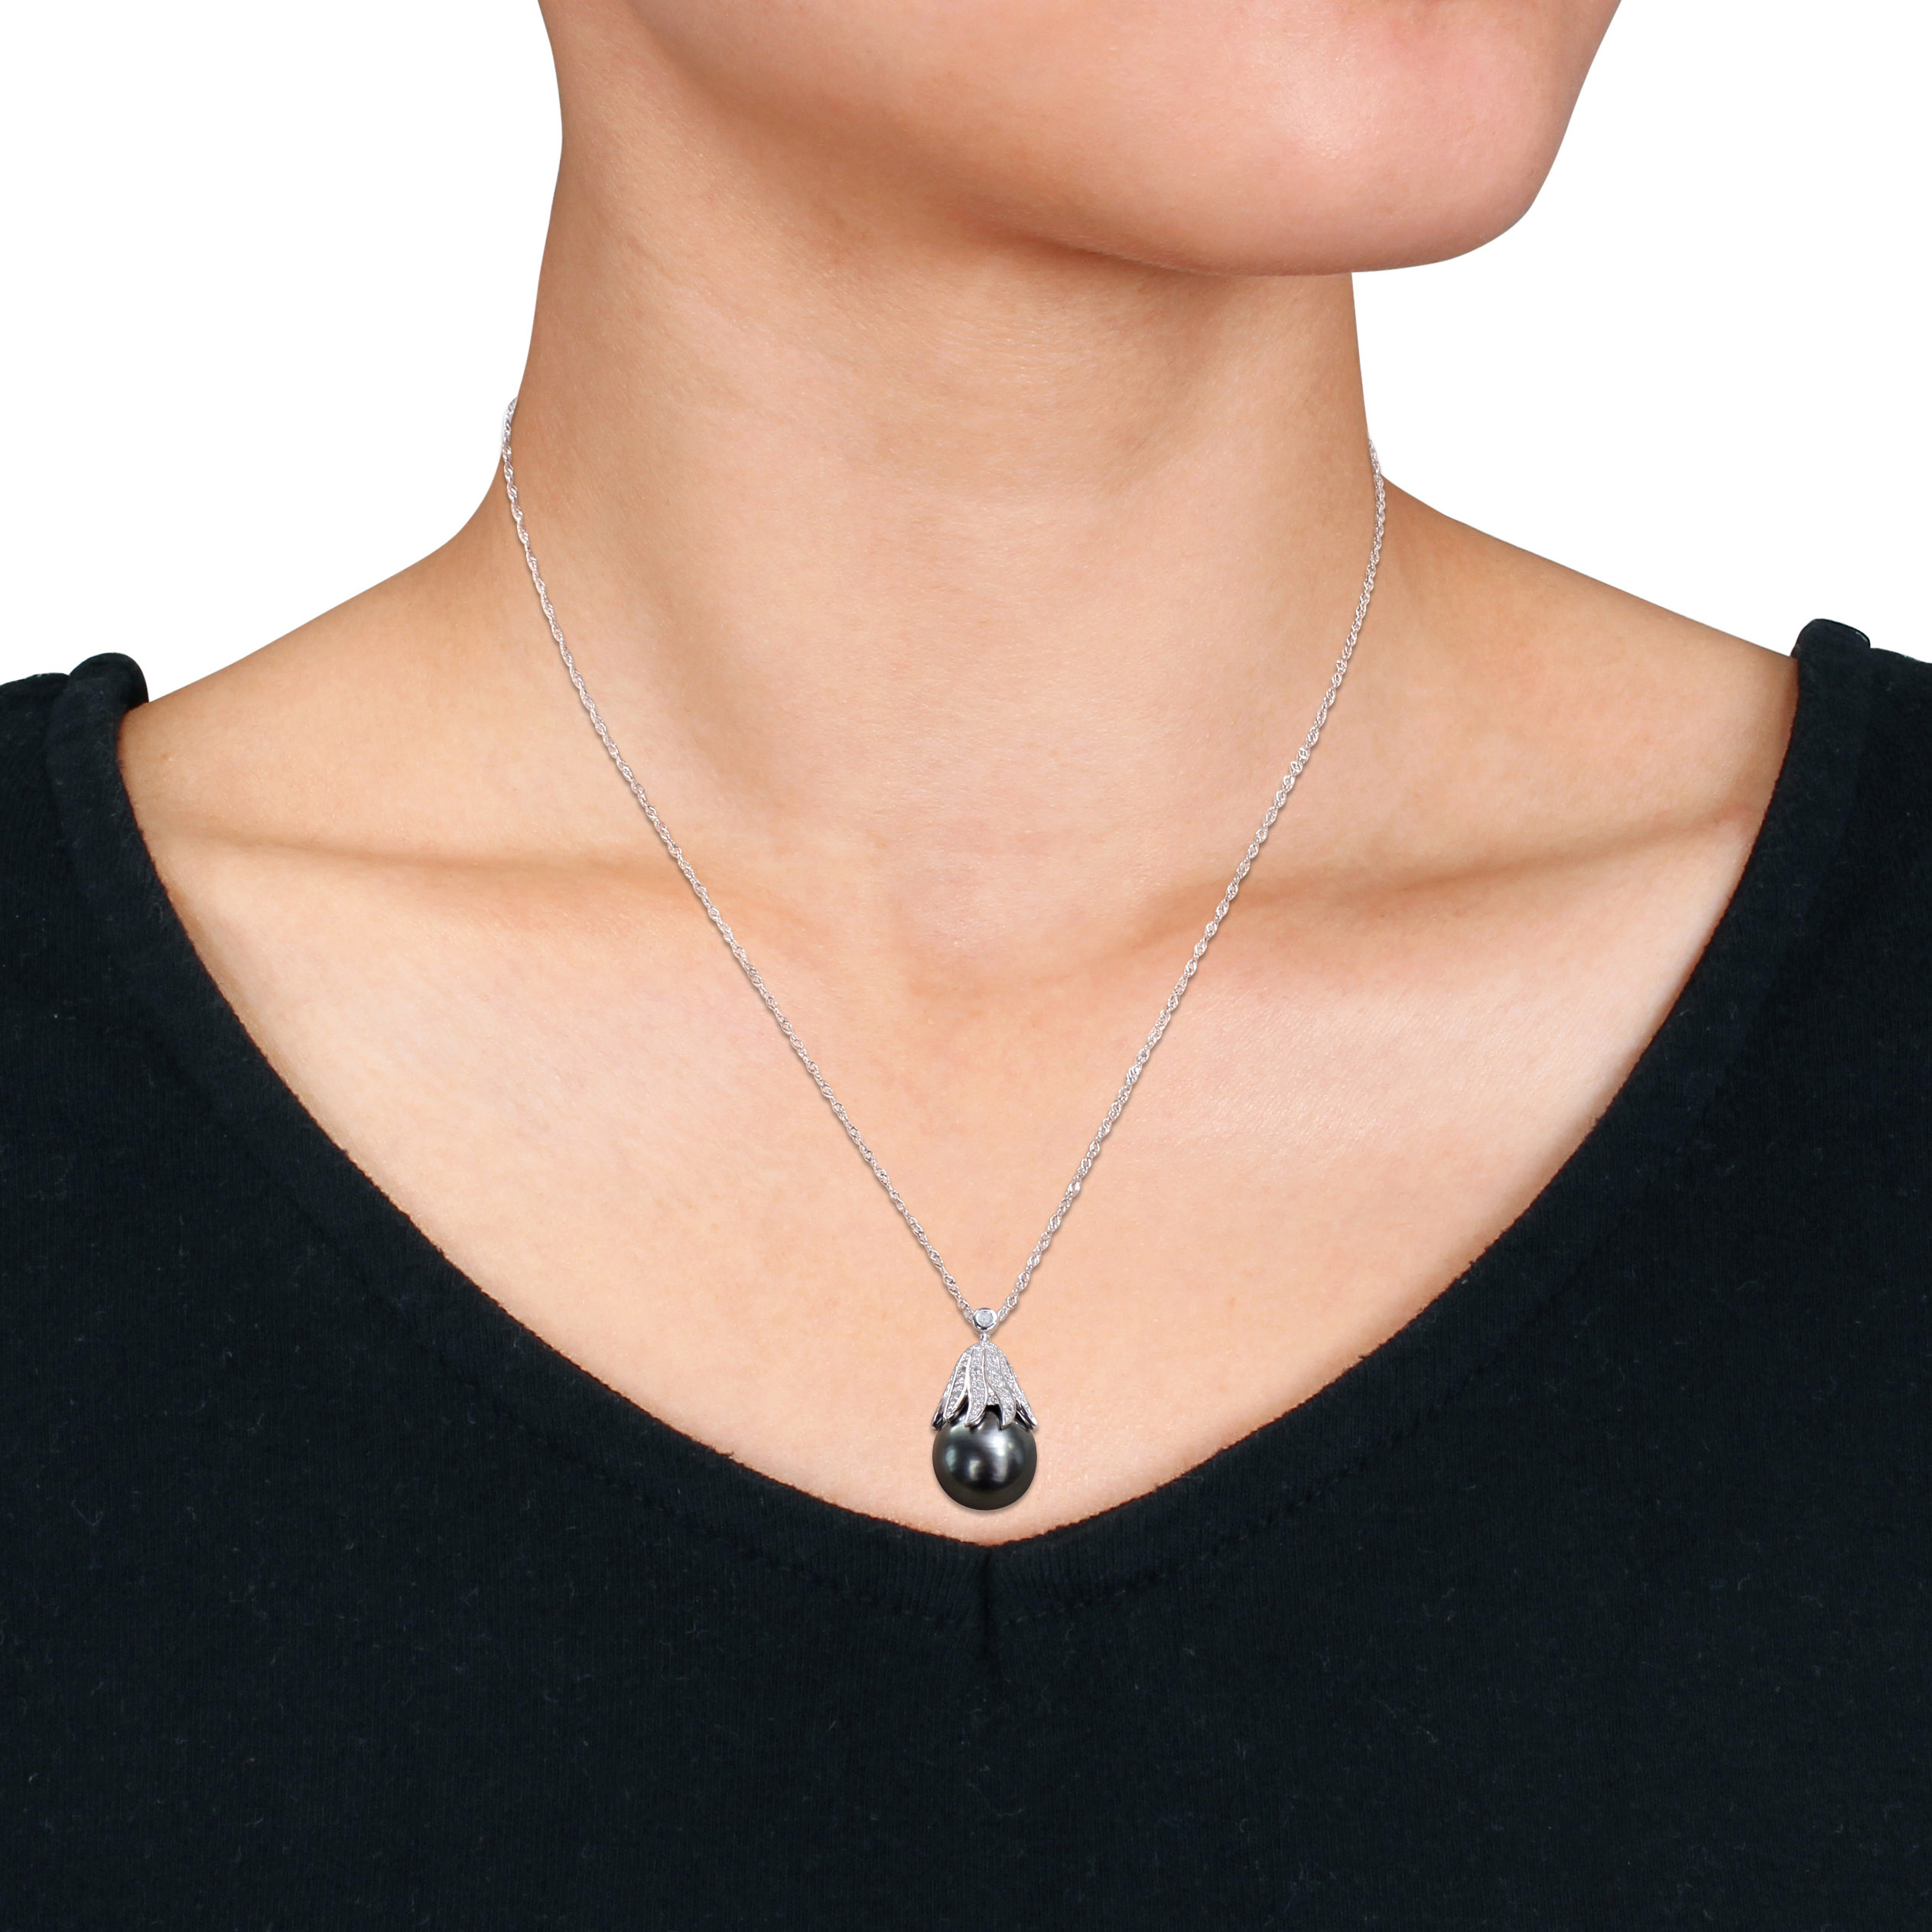 10-11 MM Black Tahitian Cultured Pearl & Diamond Accent Pendant with Chain in 14k White Gold